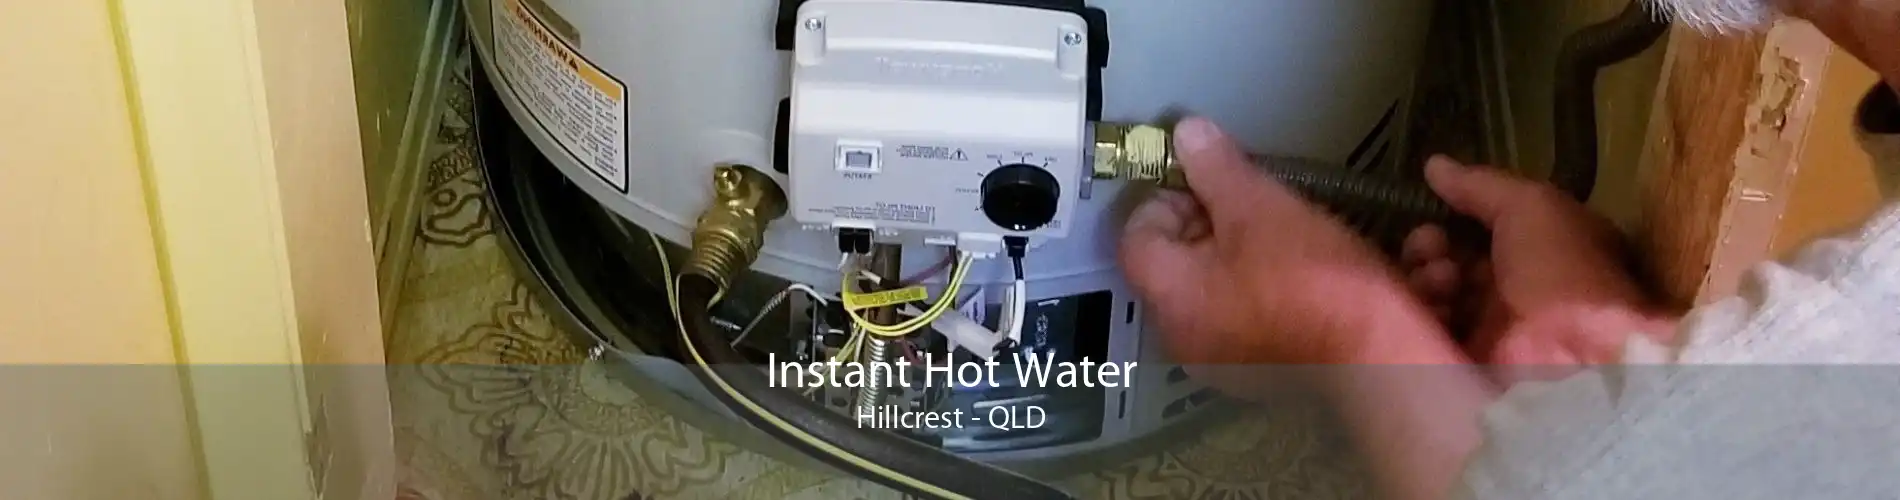 Instant Hot Water Hillcrest - QLD